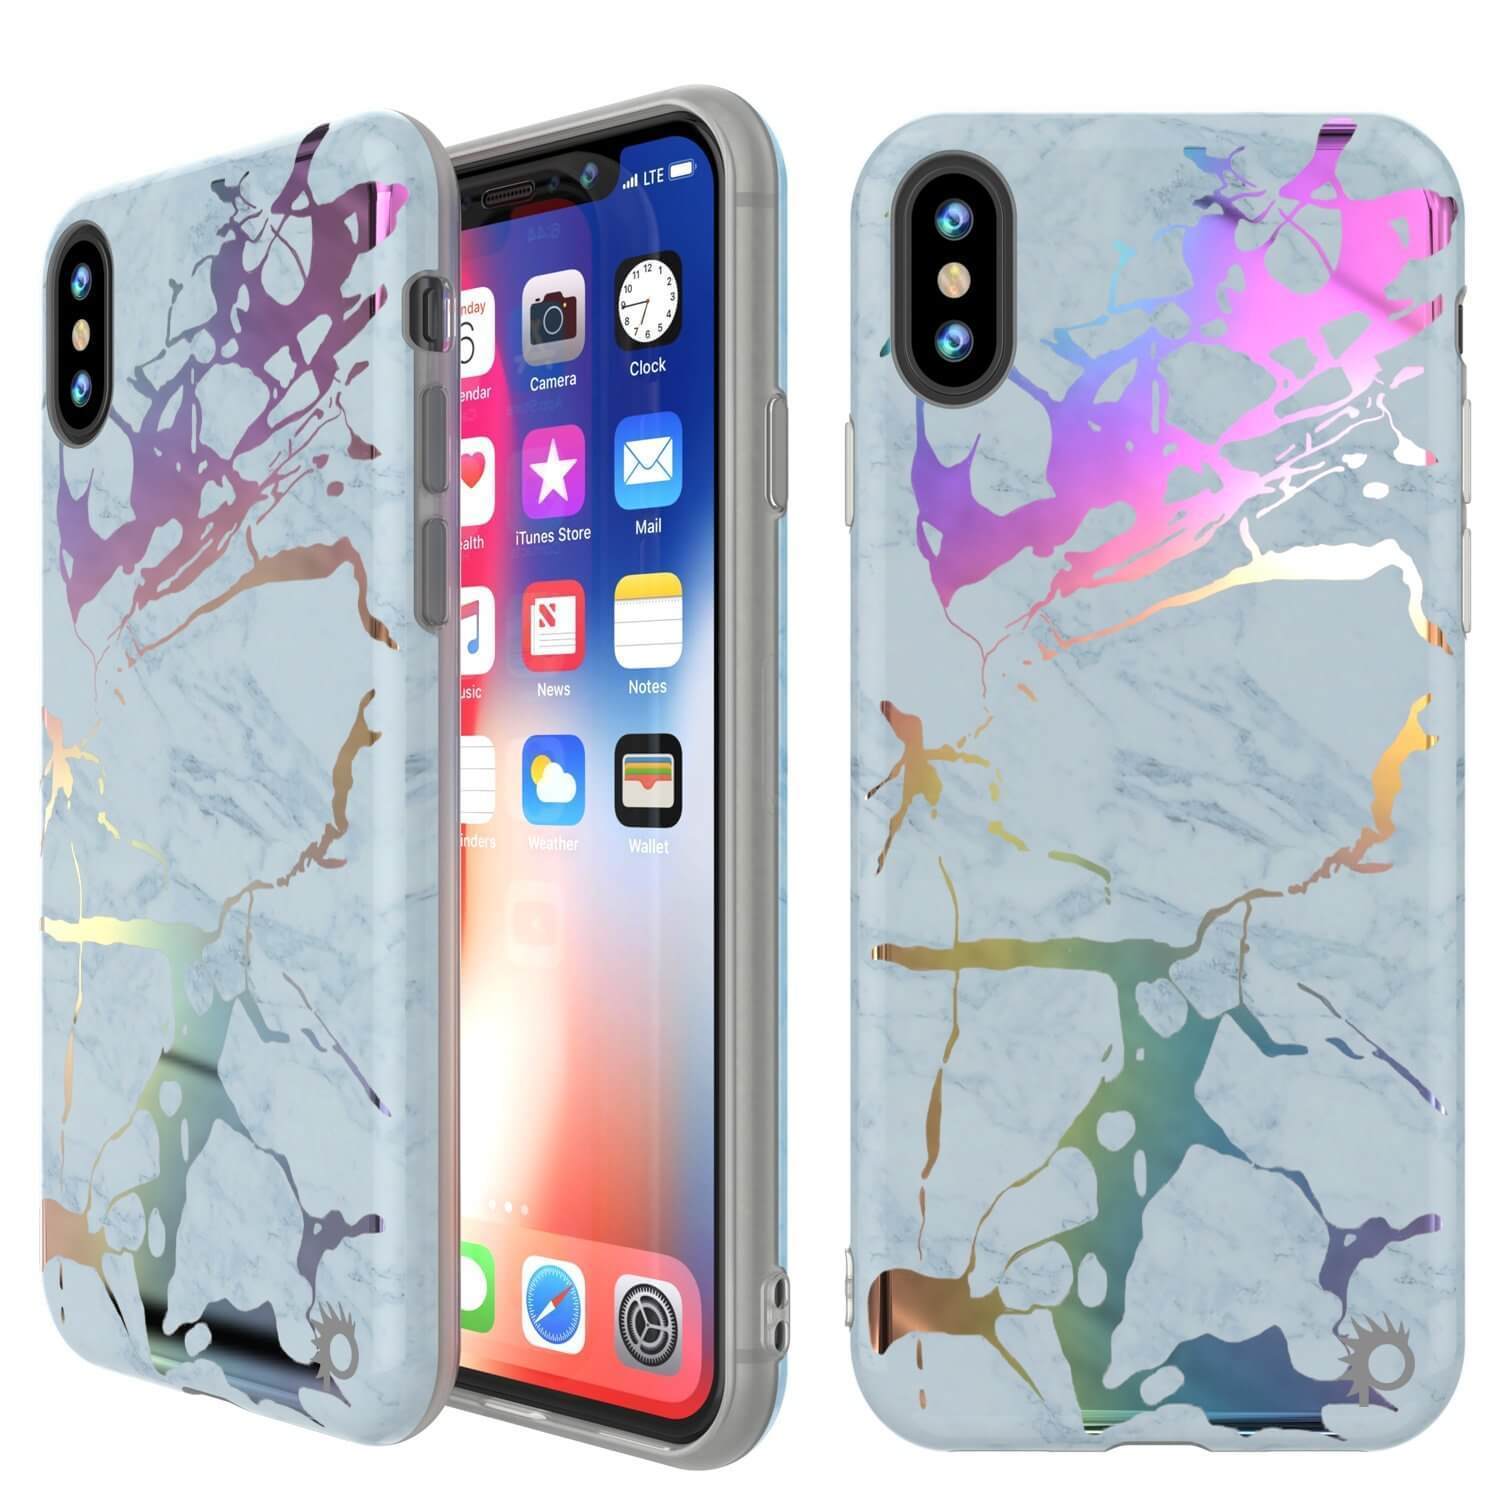 Punkcase iPhone XS Max Marble Case, Protective Full Body Cover W/9H Tempered Glass Screen Protector (Blue Marmo)